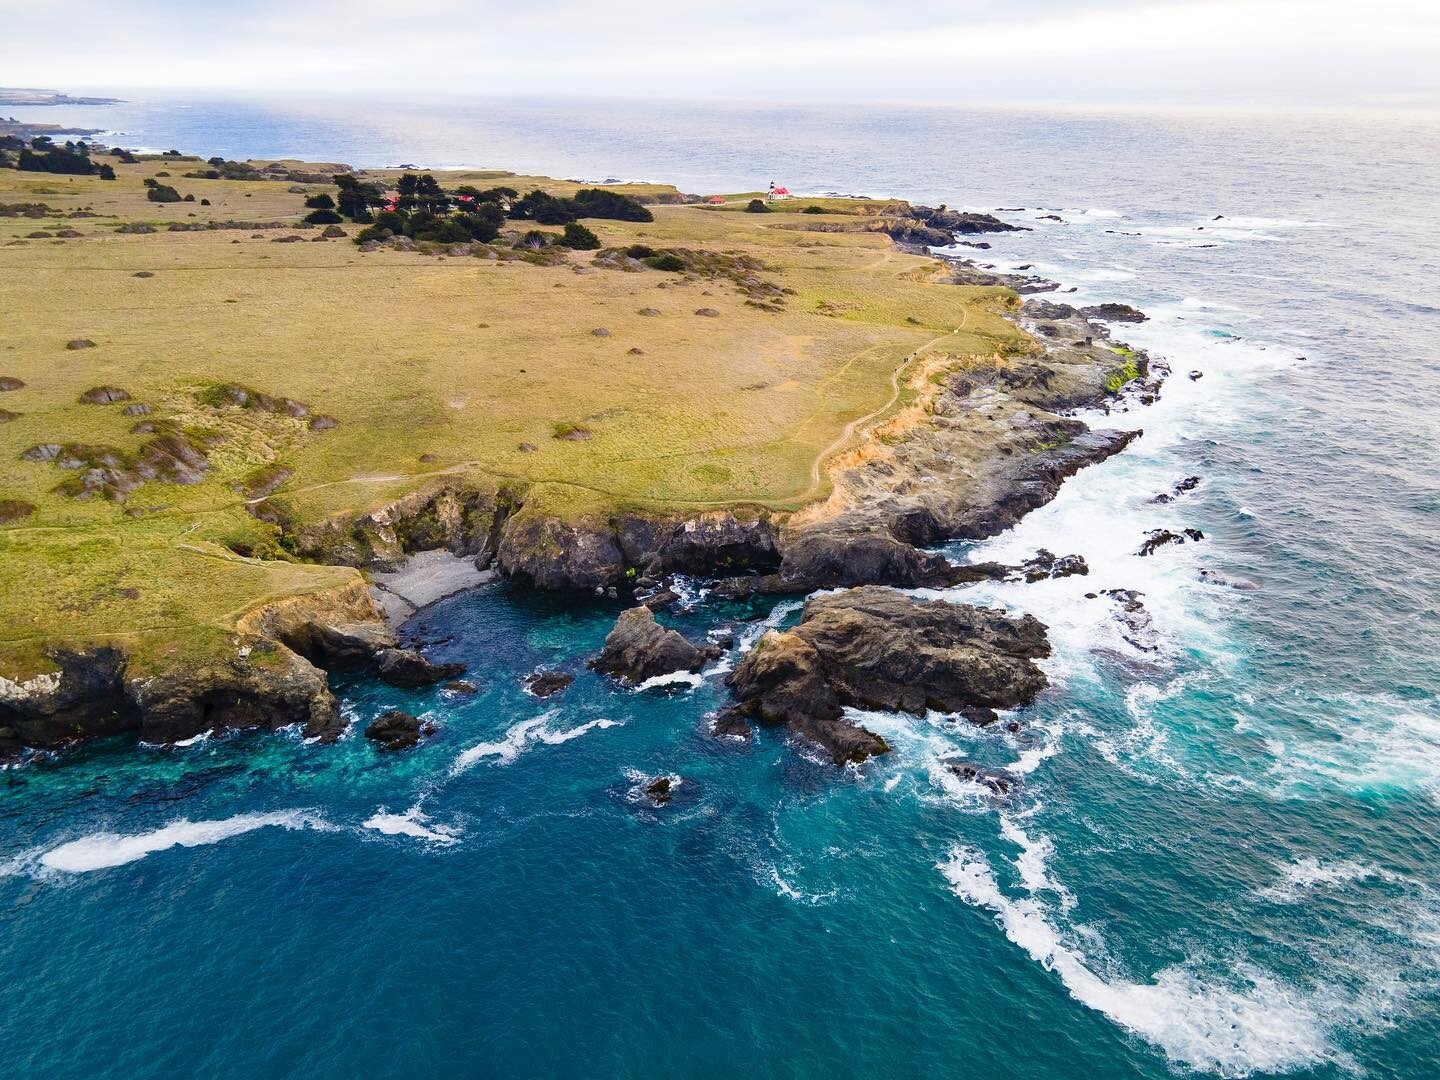 Point Cabrillo Light Station

Got this shot from my drone while staying well away from any wildlife back in May of last year. Mendocino has some of the coolest coastlines I&rsquo;ve seen.

#lighthouse #mendocino #visitmendocino